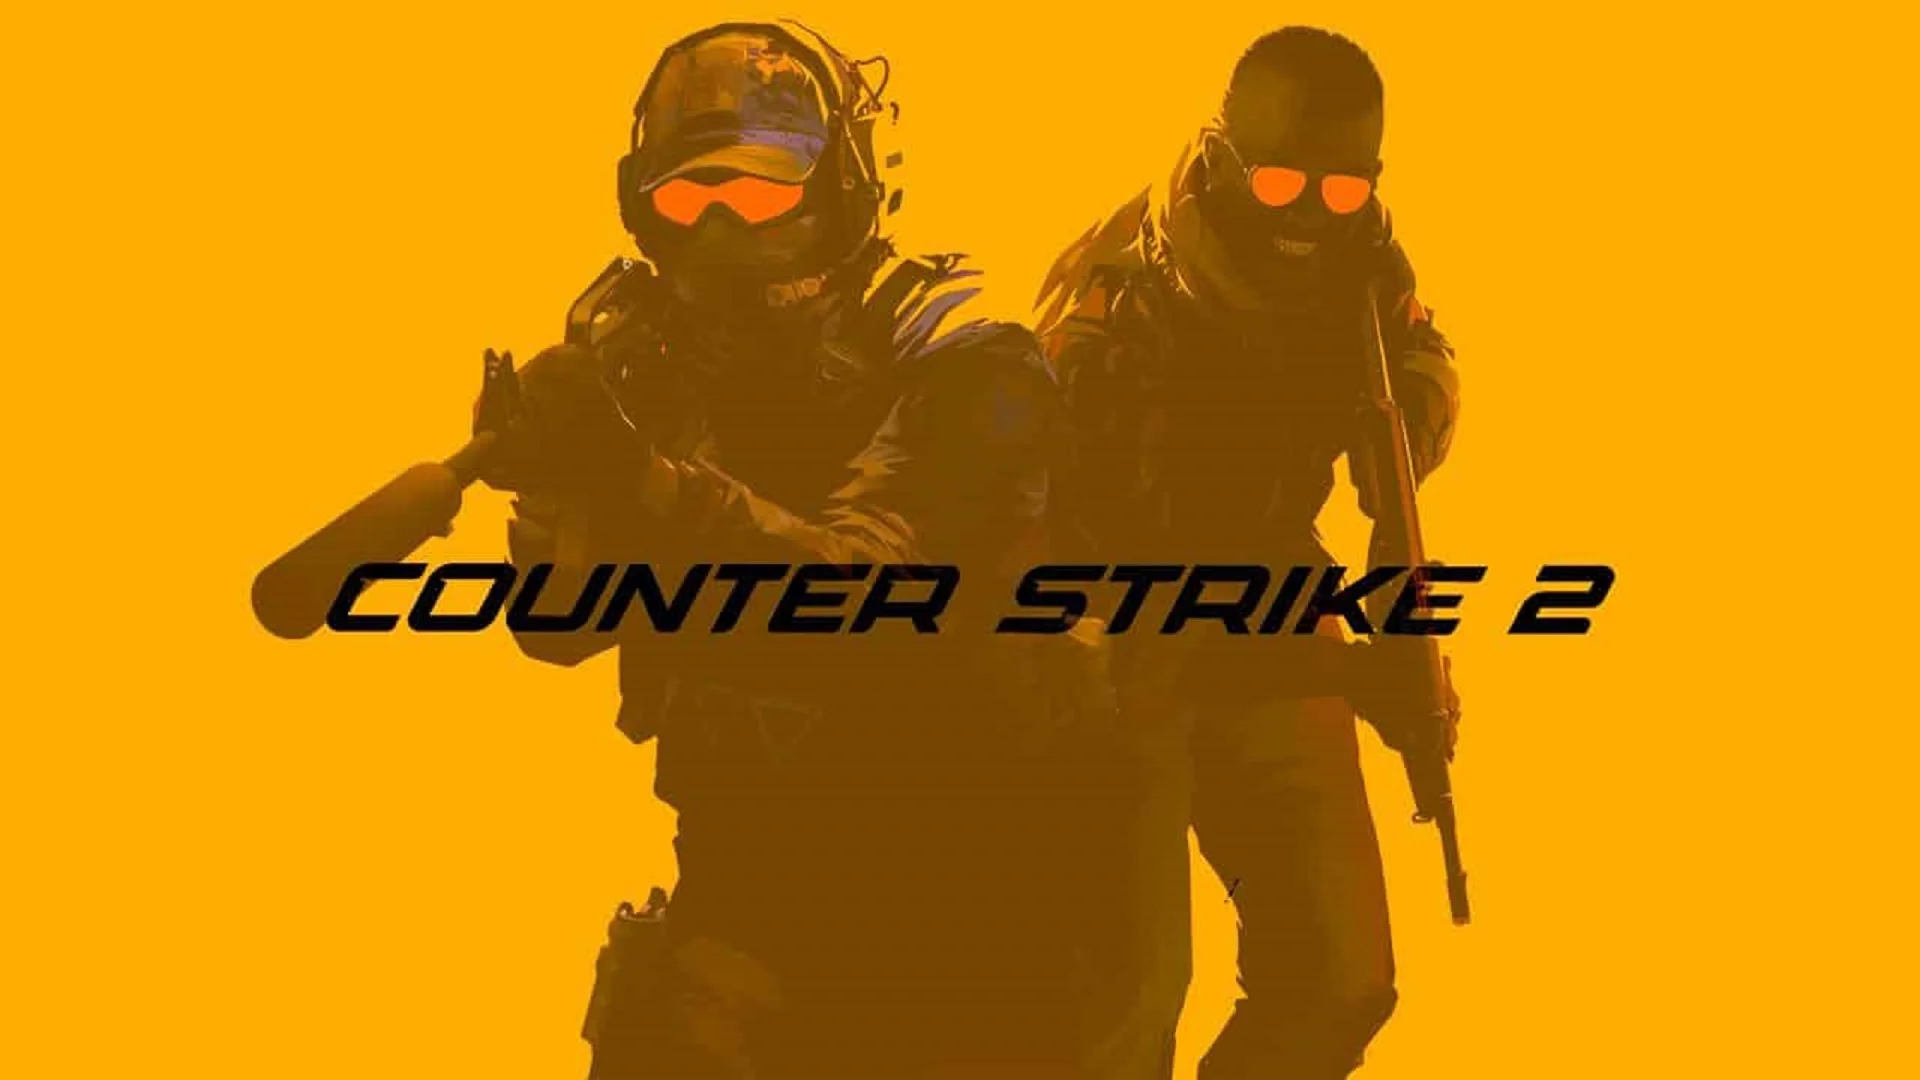 Counter-Strike 2 may get modes found in previous CS games